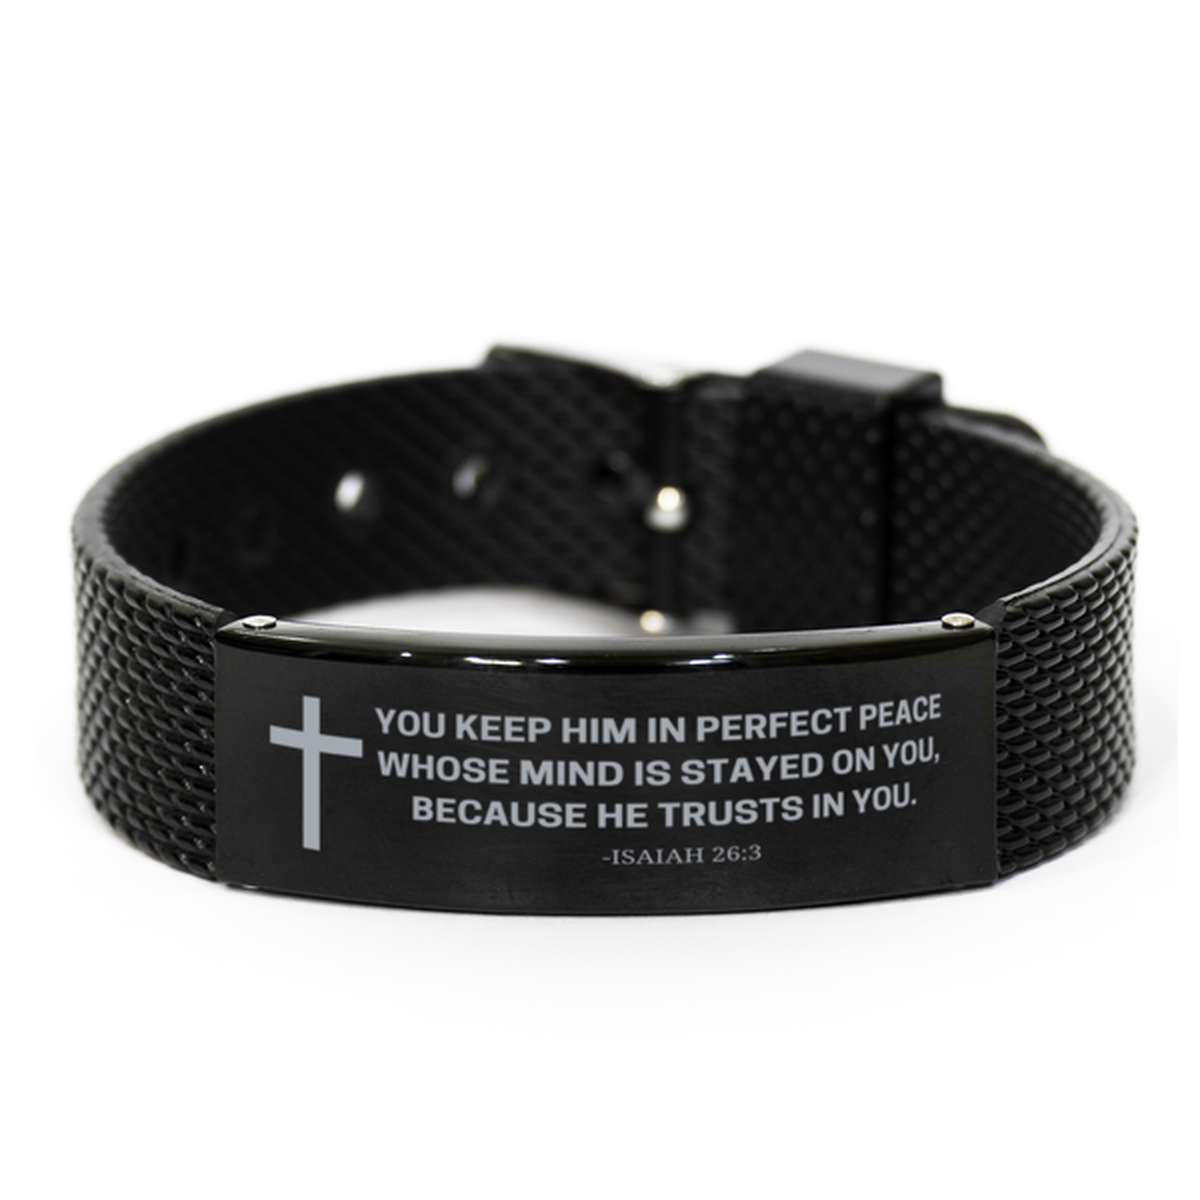 Baptism Gifts For Teenage Boys Girls, Christian Bible Verse Black Shark Mesh Bracelet, You keep him in perfect peace, Catholic Confirmation Gifts for Son, Godson, Grandson, Nephew